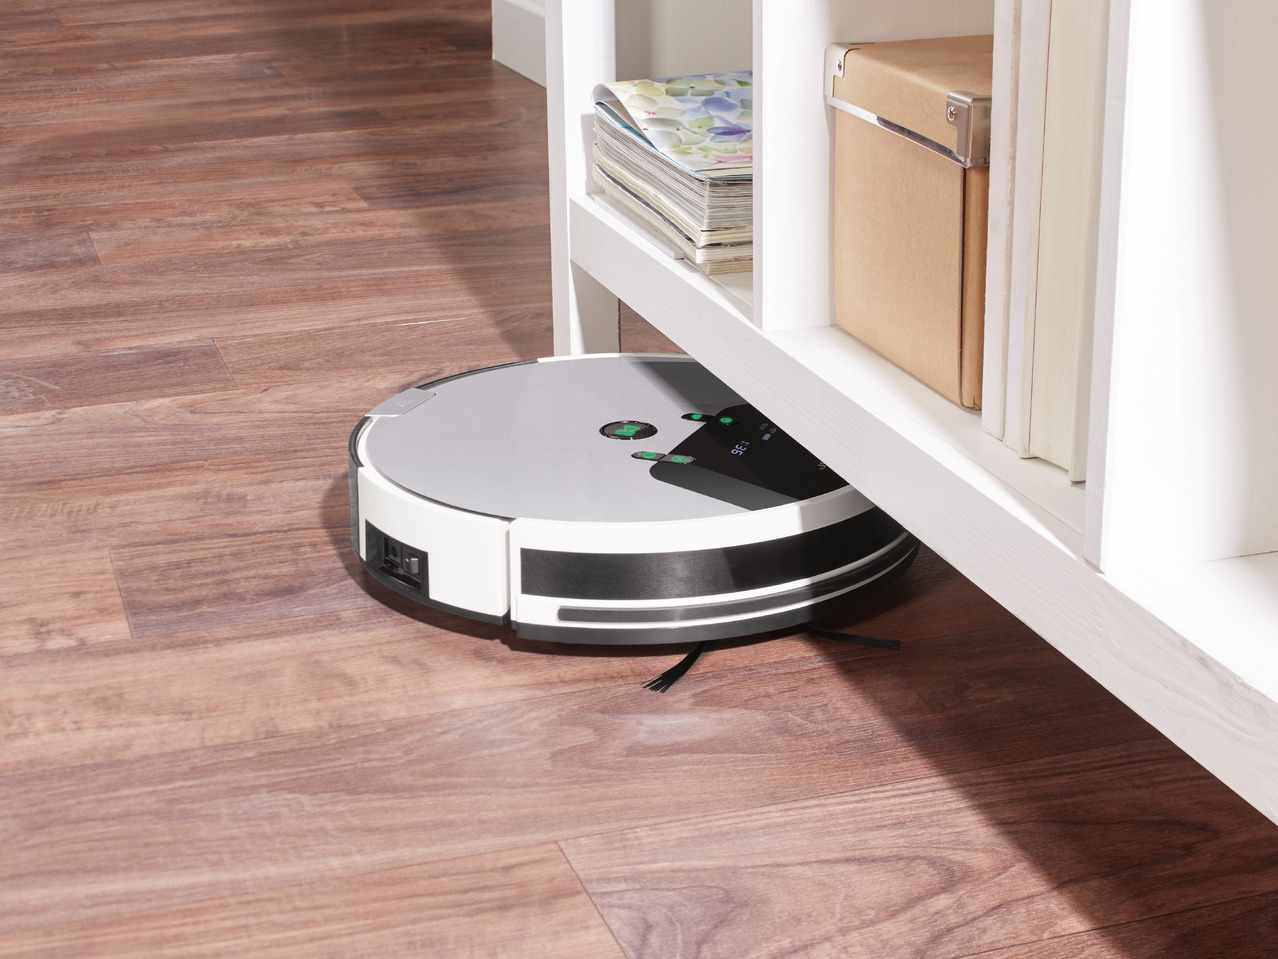 SILVERCREST Robot Vacuum Cleaner with App